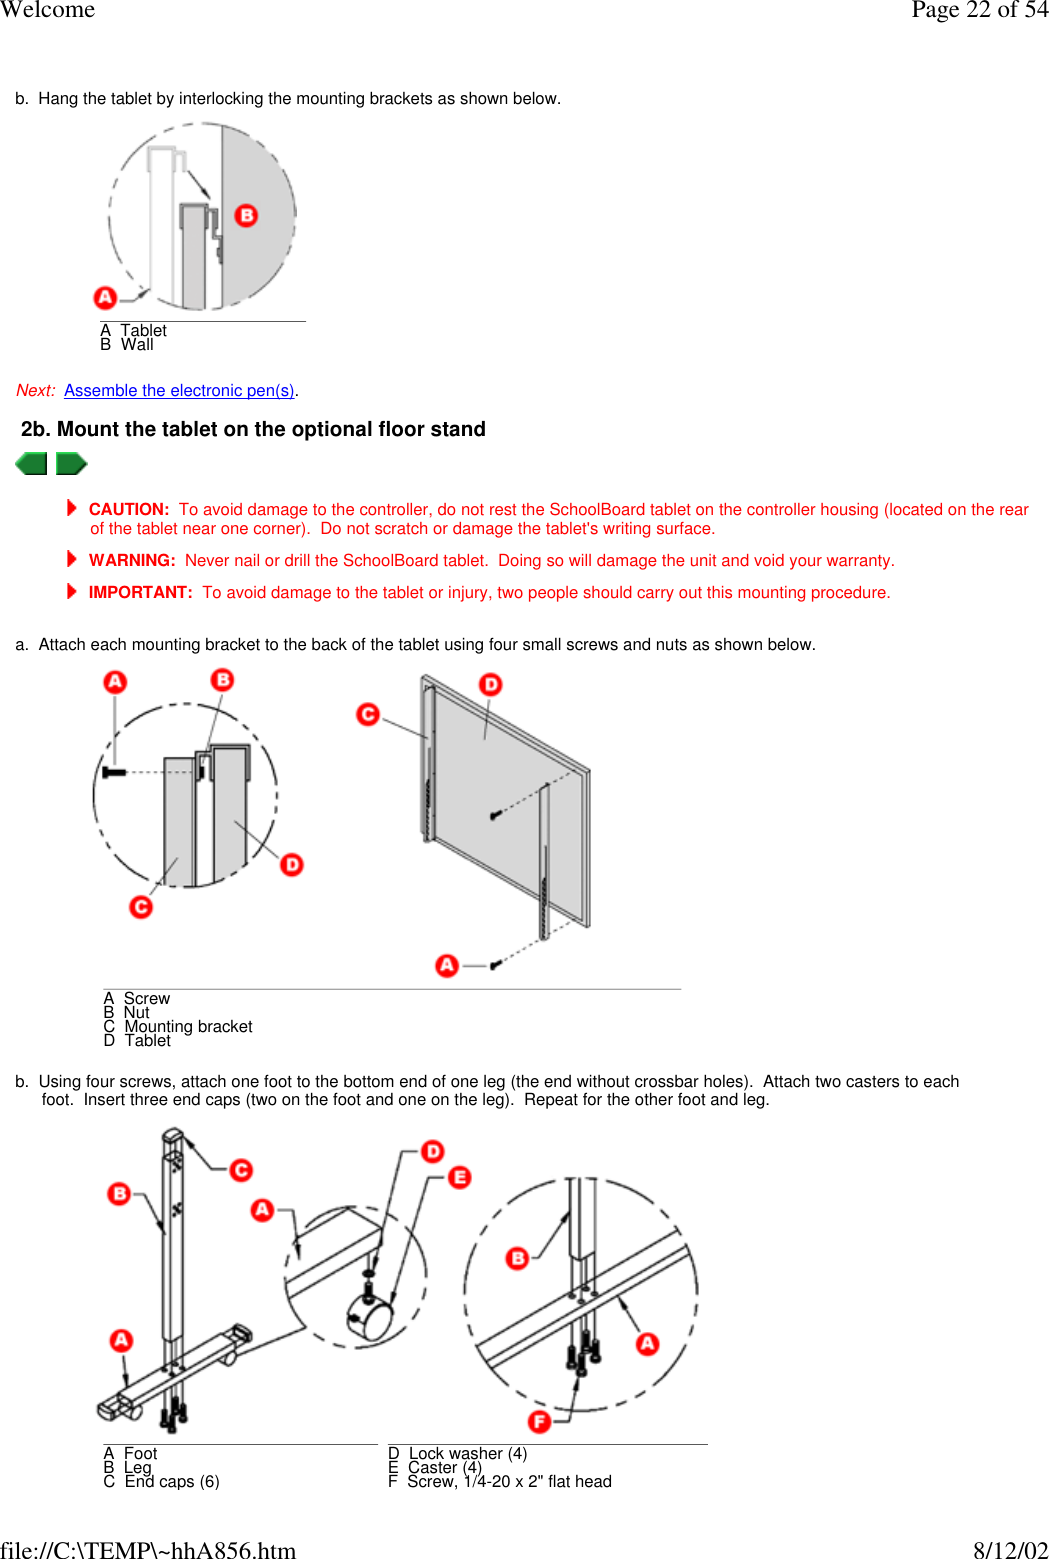 Welcome Page 22 of 54file://C:\TEMP\~hhA856.htm 8/12/02 b.  Hang the tablet by interlocking the mounting brackets as shown below. Next:  Assemble the electronic pen(s). 2b. Mount the tablet on the optional floor stand     CAUTION:  To avoid damage to the controller, do not rest the SchoolBoard tablet on the controller housing (located on the rear of the tablet near one corner).  Do not scratch or damage the tablet&apos;s writing surface.  WARNING:  Never nail or drill the SchoolBoard tablet.  Doing so will damage the unit and void your warranty.  IMPORTANT:  To avoid damage to the tablet or injury, two people should carry out this mounting procedure. a.  Attach each mounting bracket to the back of the tablet using four small screws and nuts as shown below. b.  Using four screws, attach one foot to the bottom end of one leg (the end without crossbar holes).  Attach two casters to each foot.  Insert three end caps (two on the foot and one on the leg).  Repeat for the other foot and leg. A  TabletB  Wall A  ScrewB  NutC  Mounting bracketD  Tablet A  Foot      B  Leg      C  End caps (6)      D  Lock washer (4)E  Caster (4)F  Screw, 1/4-20 x 2&quot; flat head